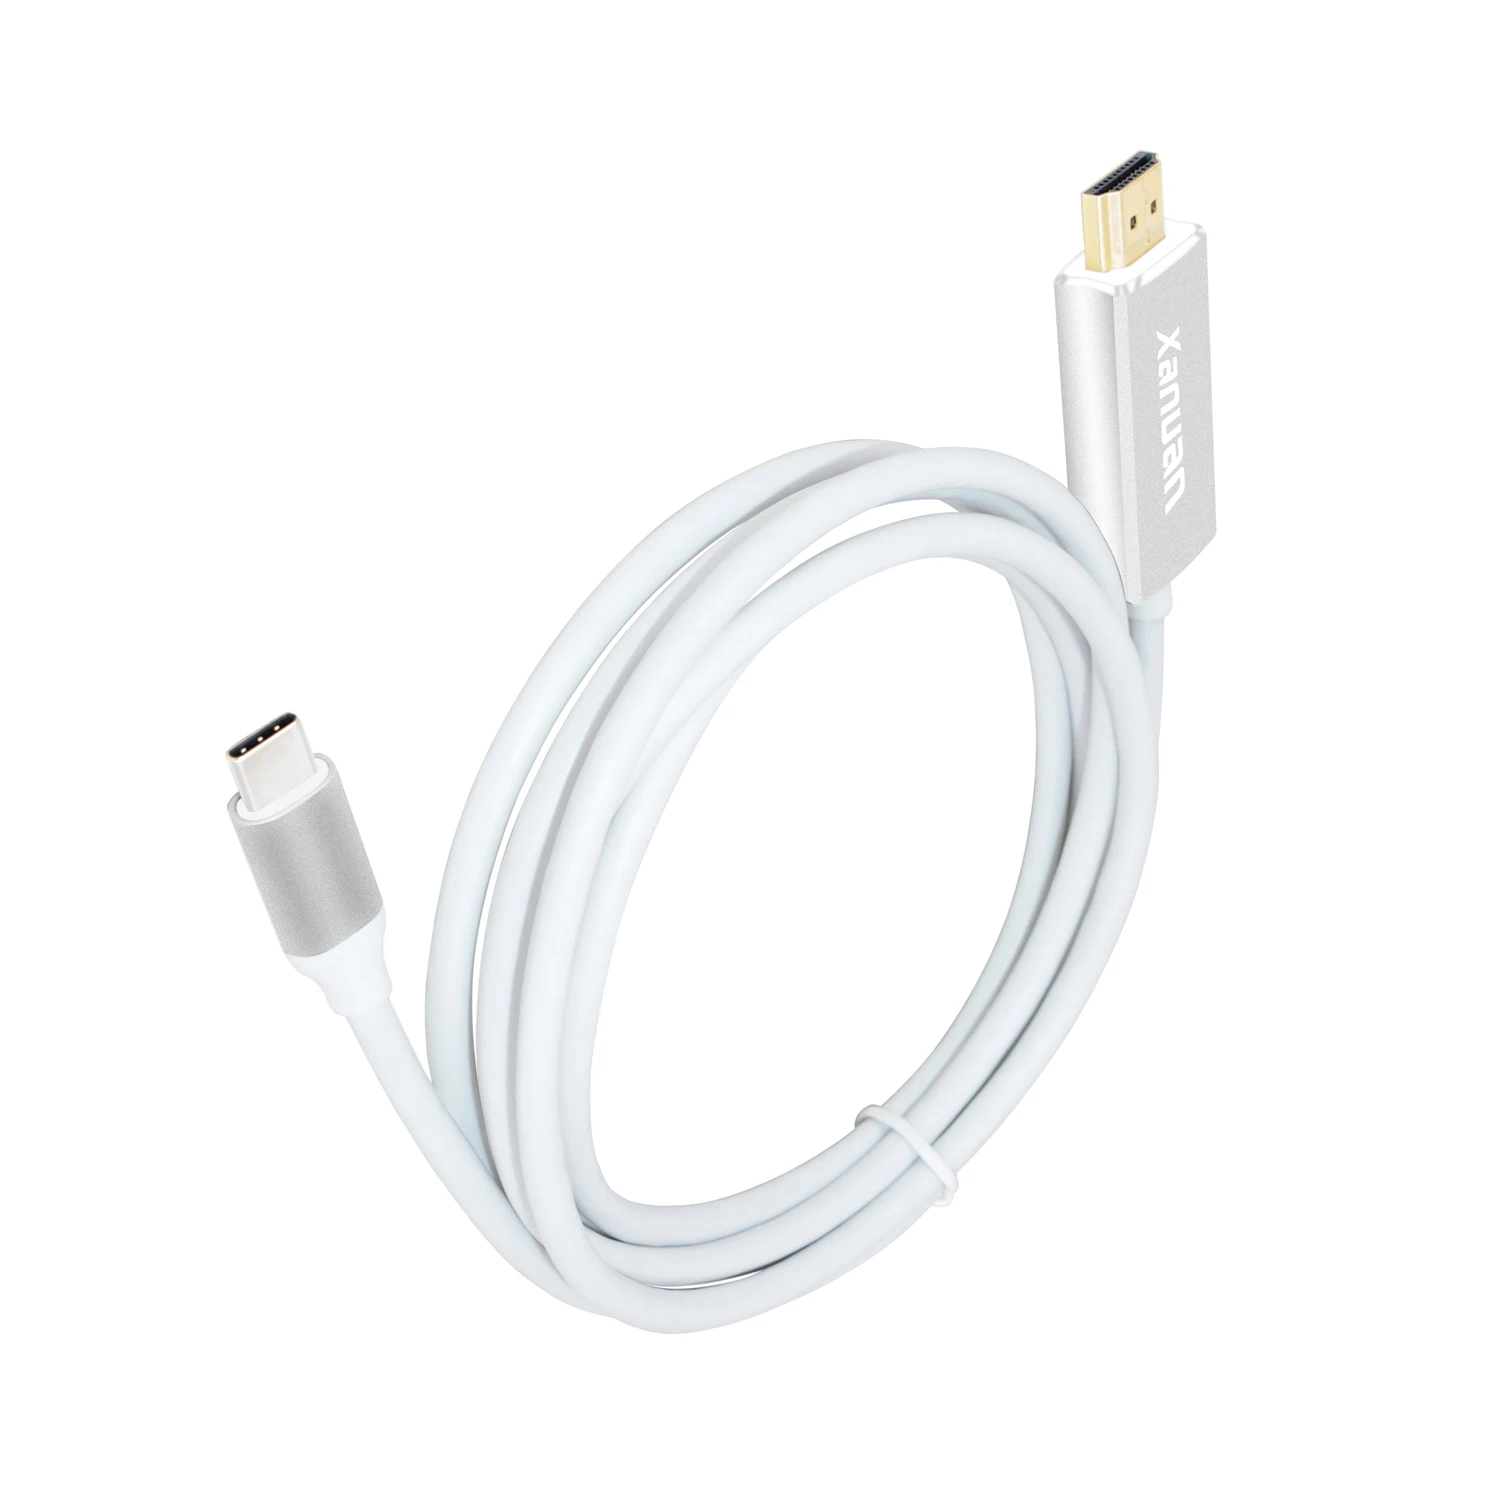 hdmi port cable for macbook air 13 inch